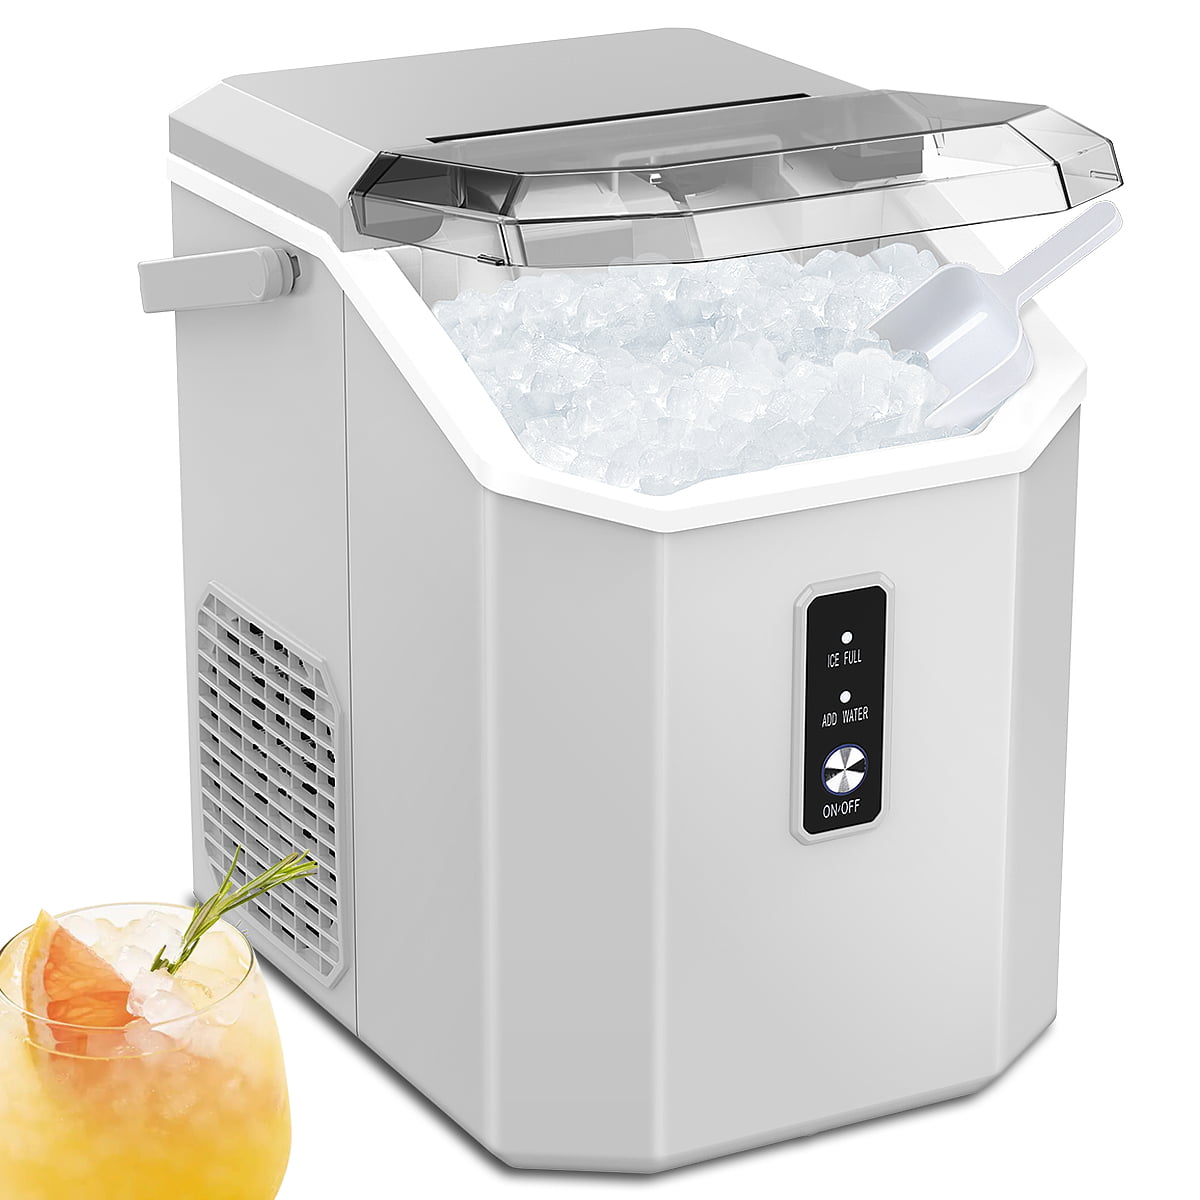 Kndko 33lbs Chewable Nugget Ice Maker with Crushed Ice, Ready in 7 Mins, Sonic Ice Machine with Handle, Gray